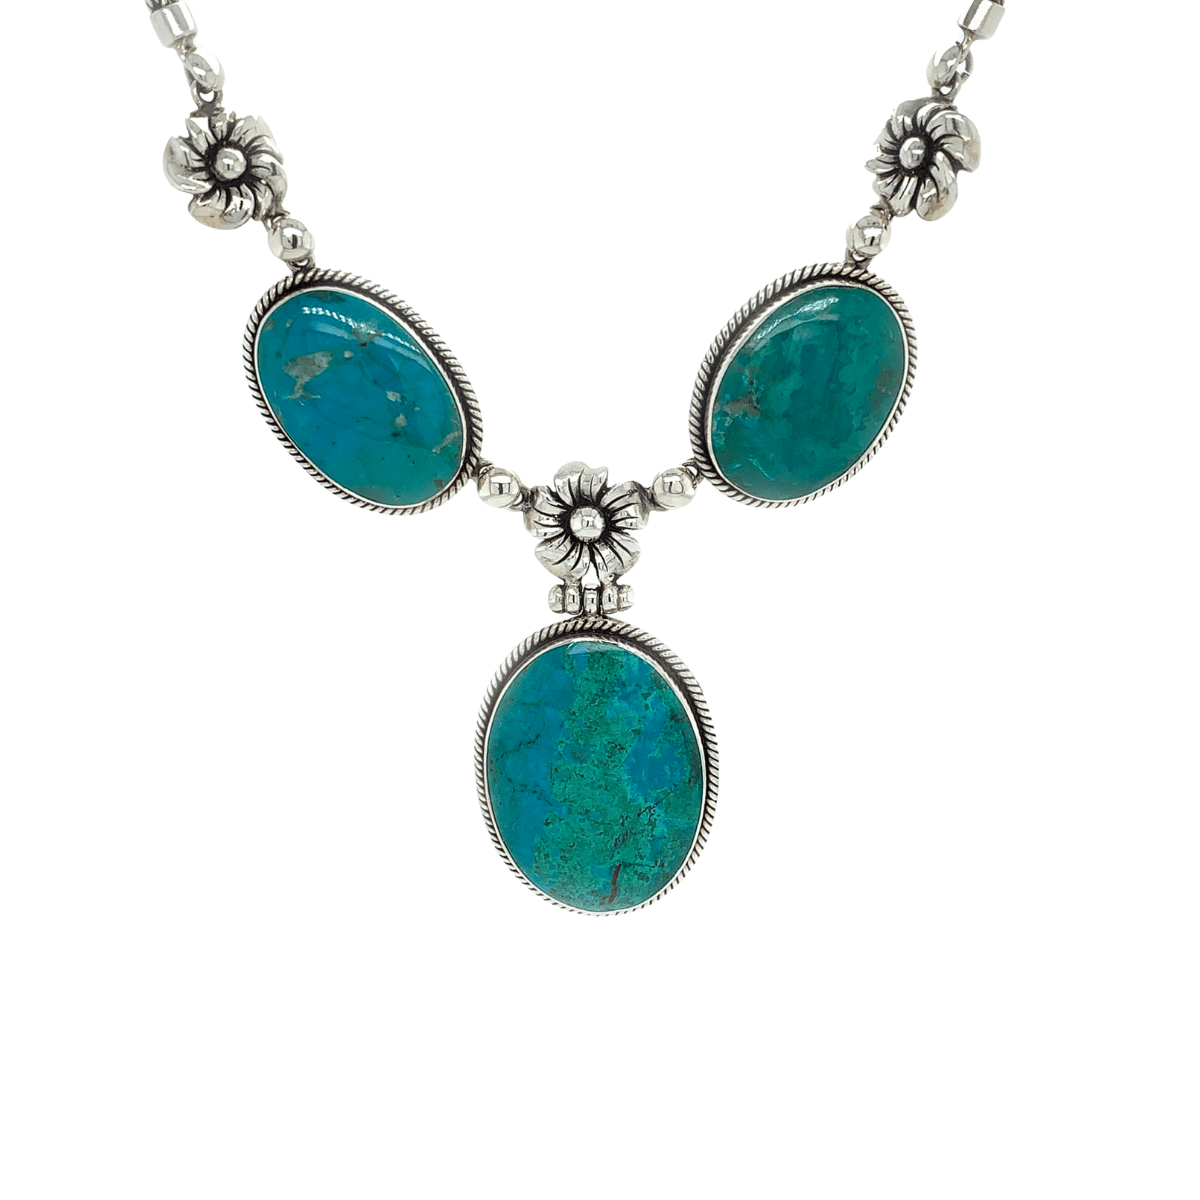 Chrysocolla (Peruvian Turquoise) Ovals &amp; Sterling Silver Necklace - Qinti - The Peruvian Shop